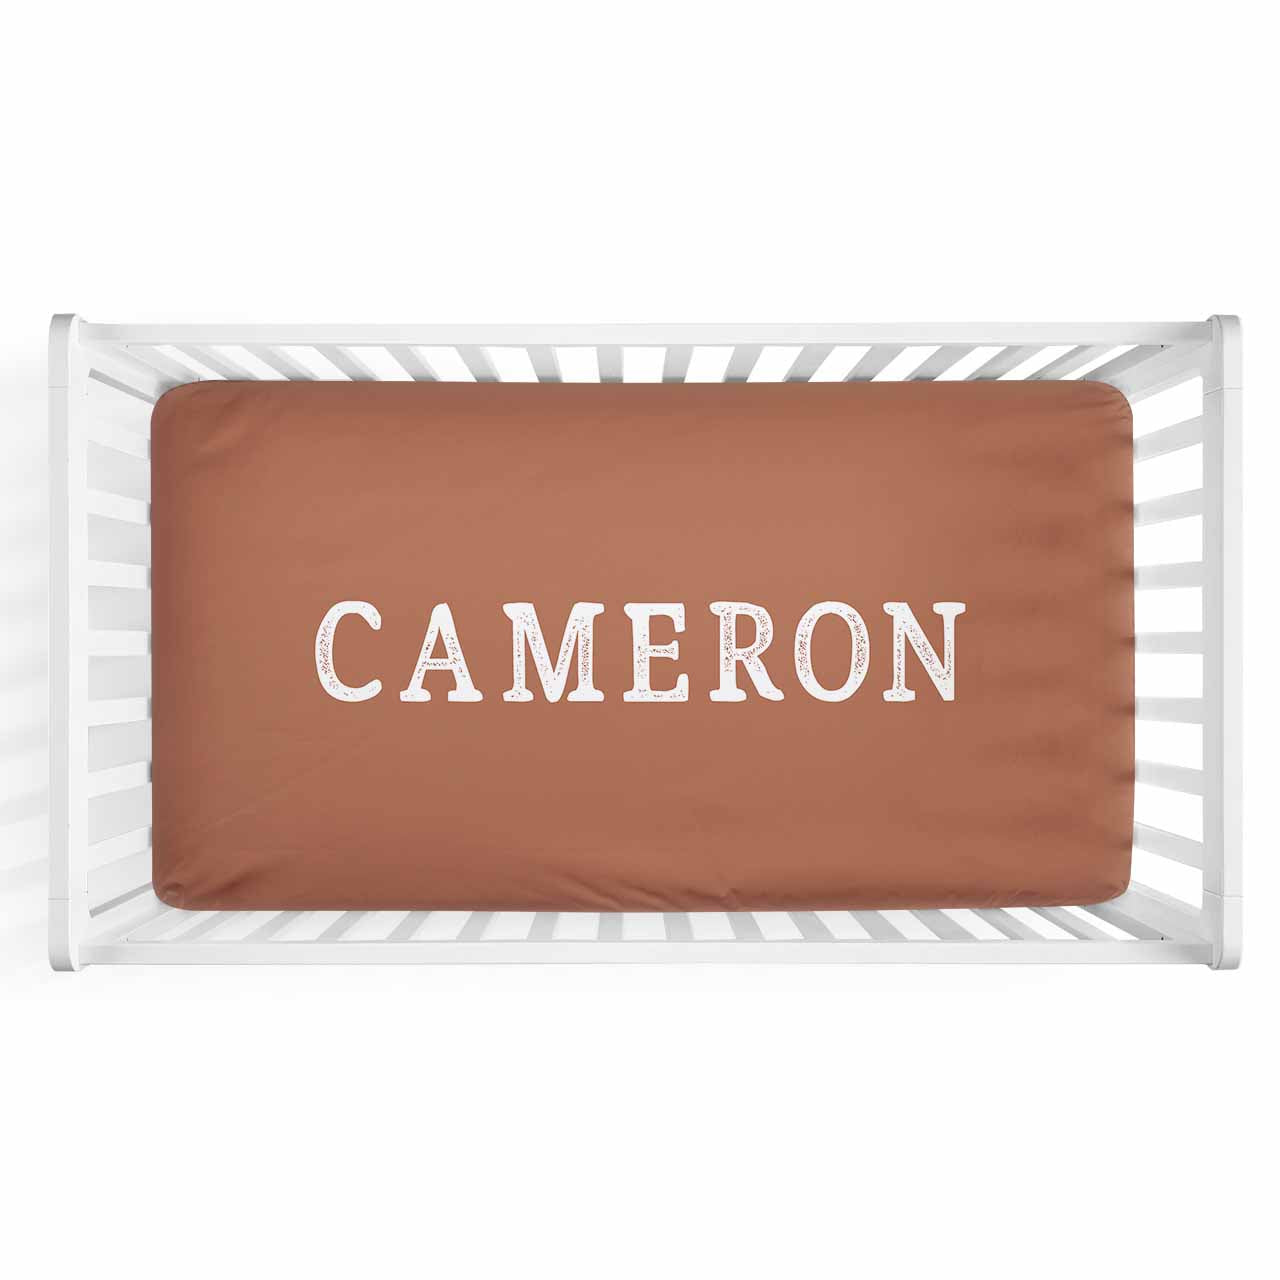 Personalized Baby Name Rust Color Jersey Knit Crib Sheet in Block Print Style